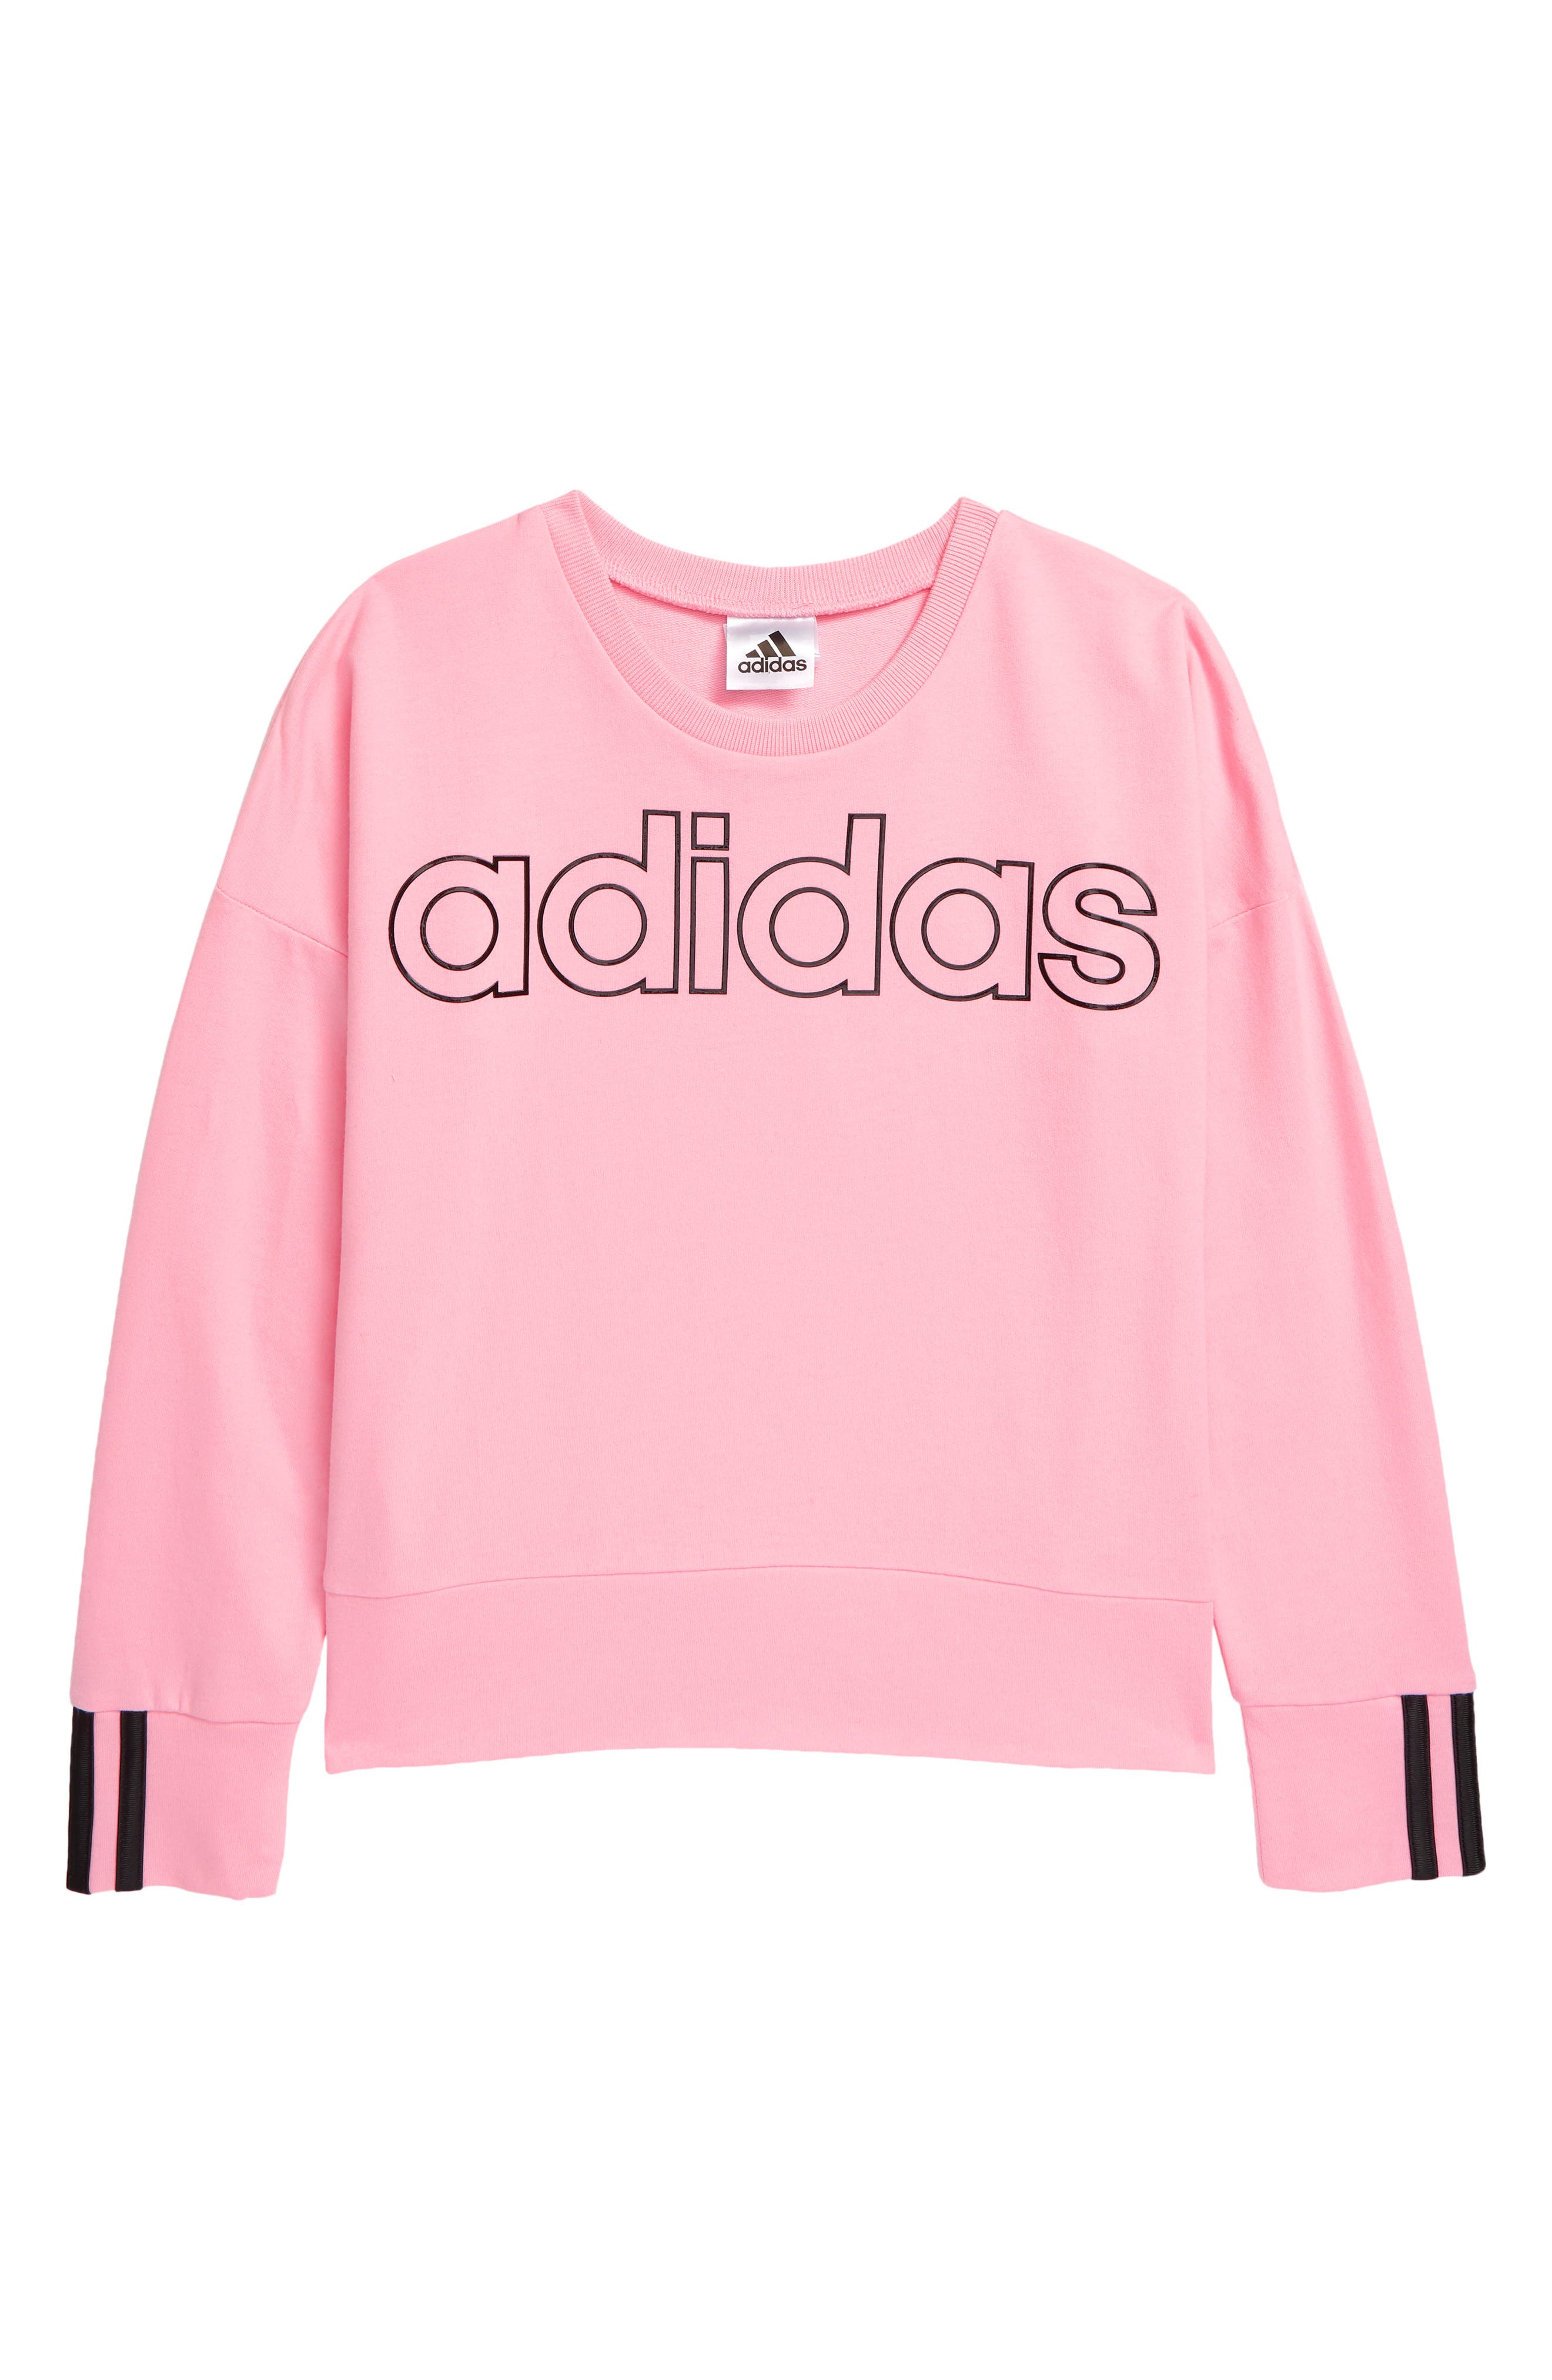 adidas clothes for girl